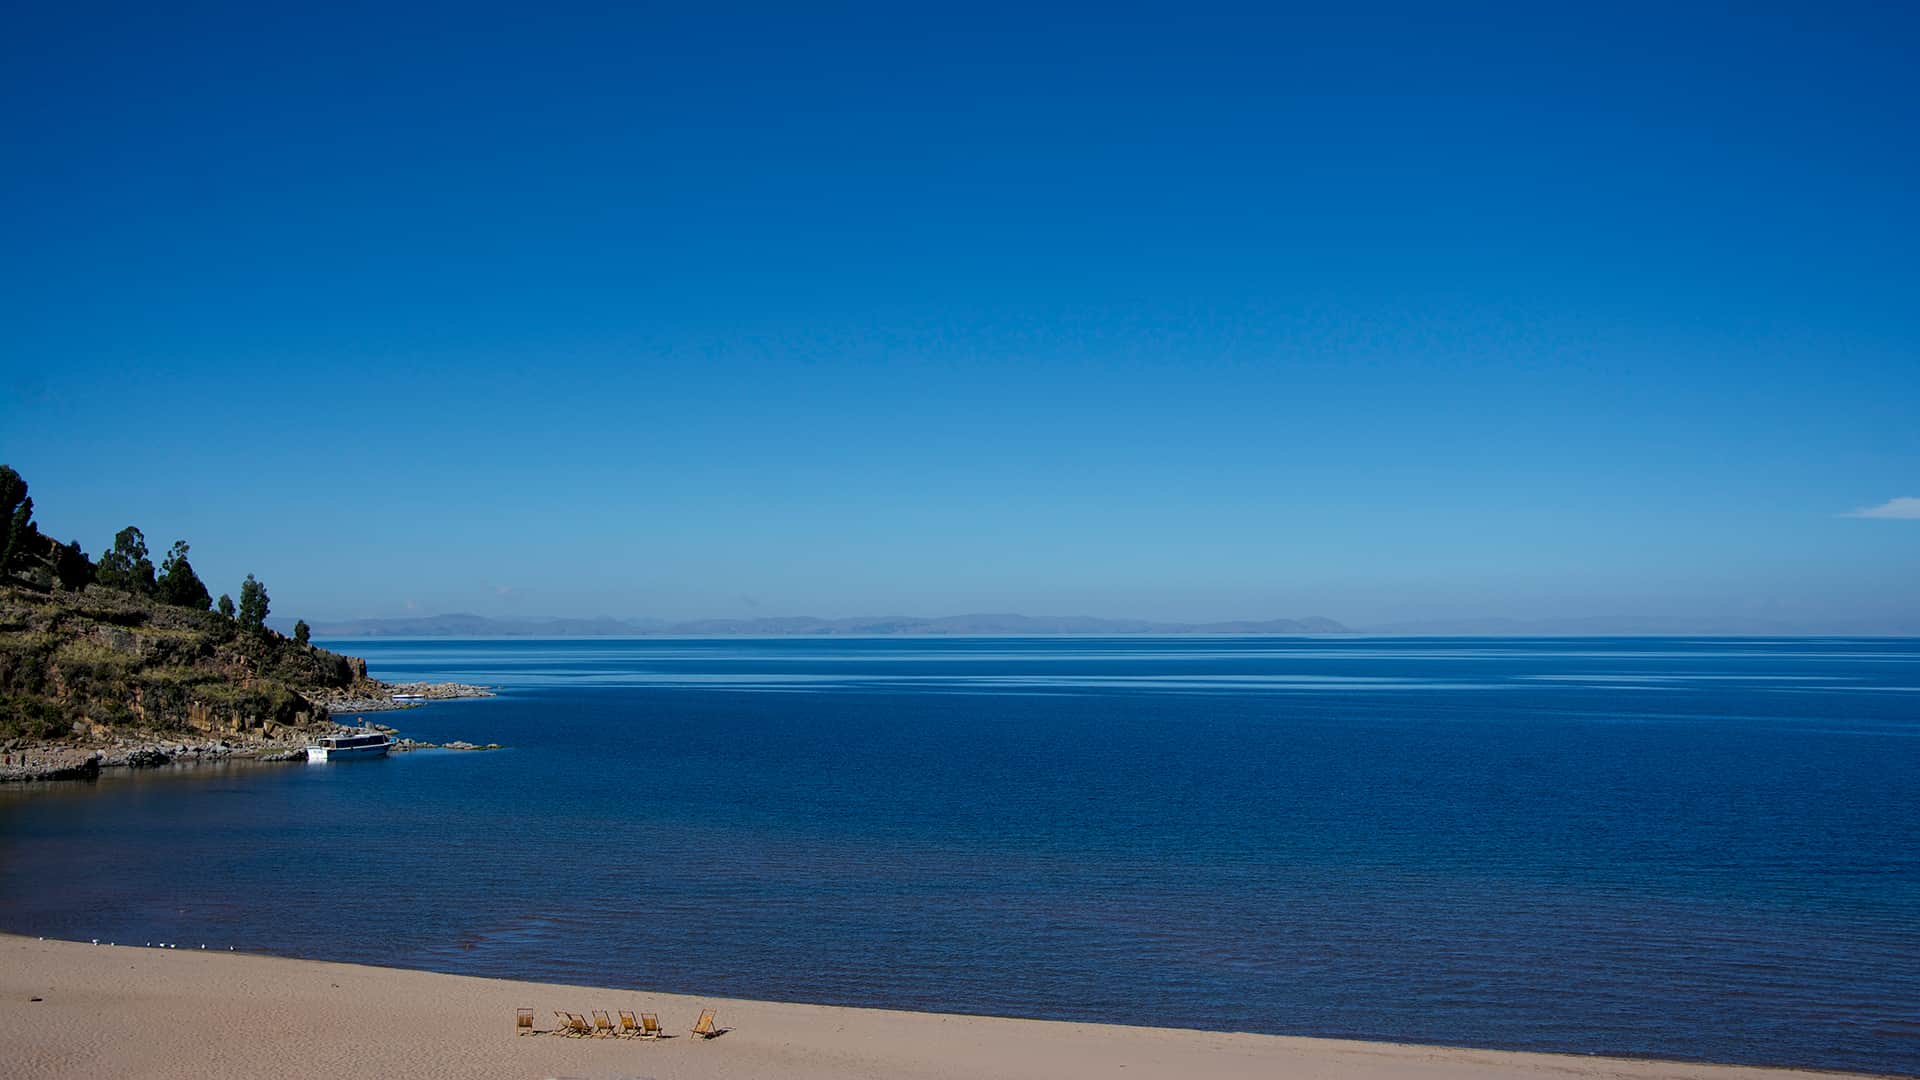 Blue sky and blue water all over, only a small beach line and tiny beach chairs visible | Responsible Travel Peru